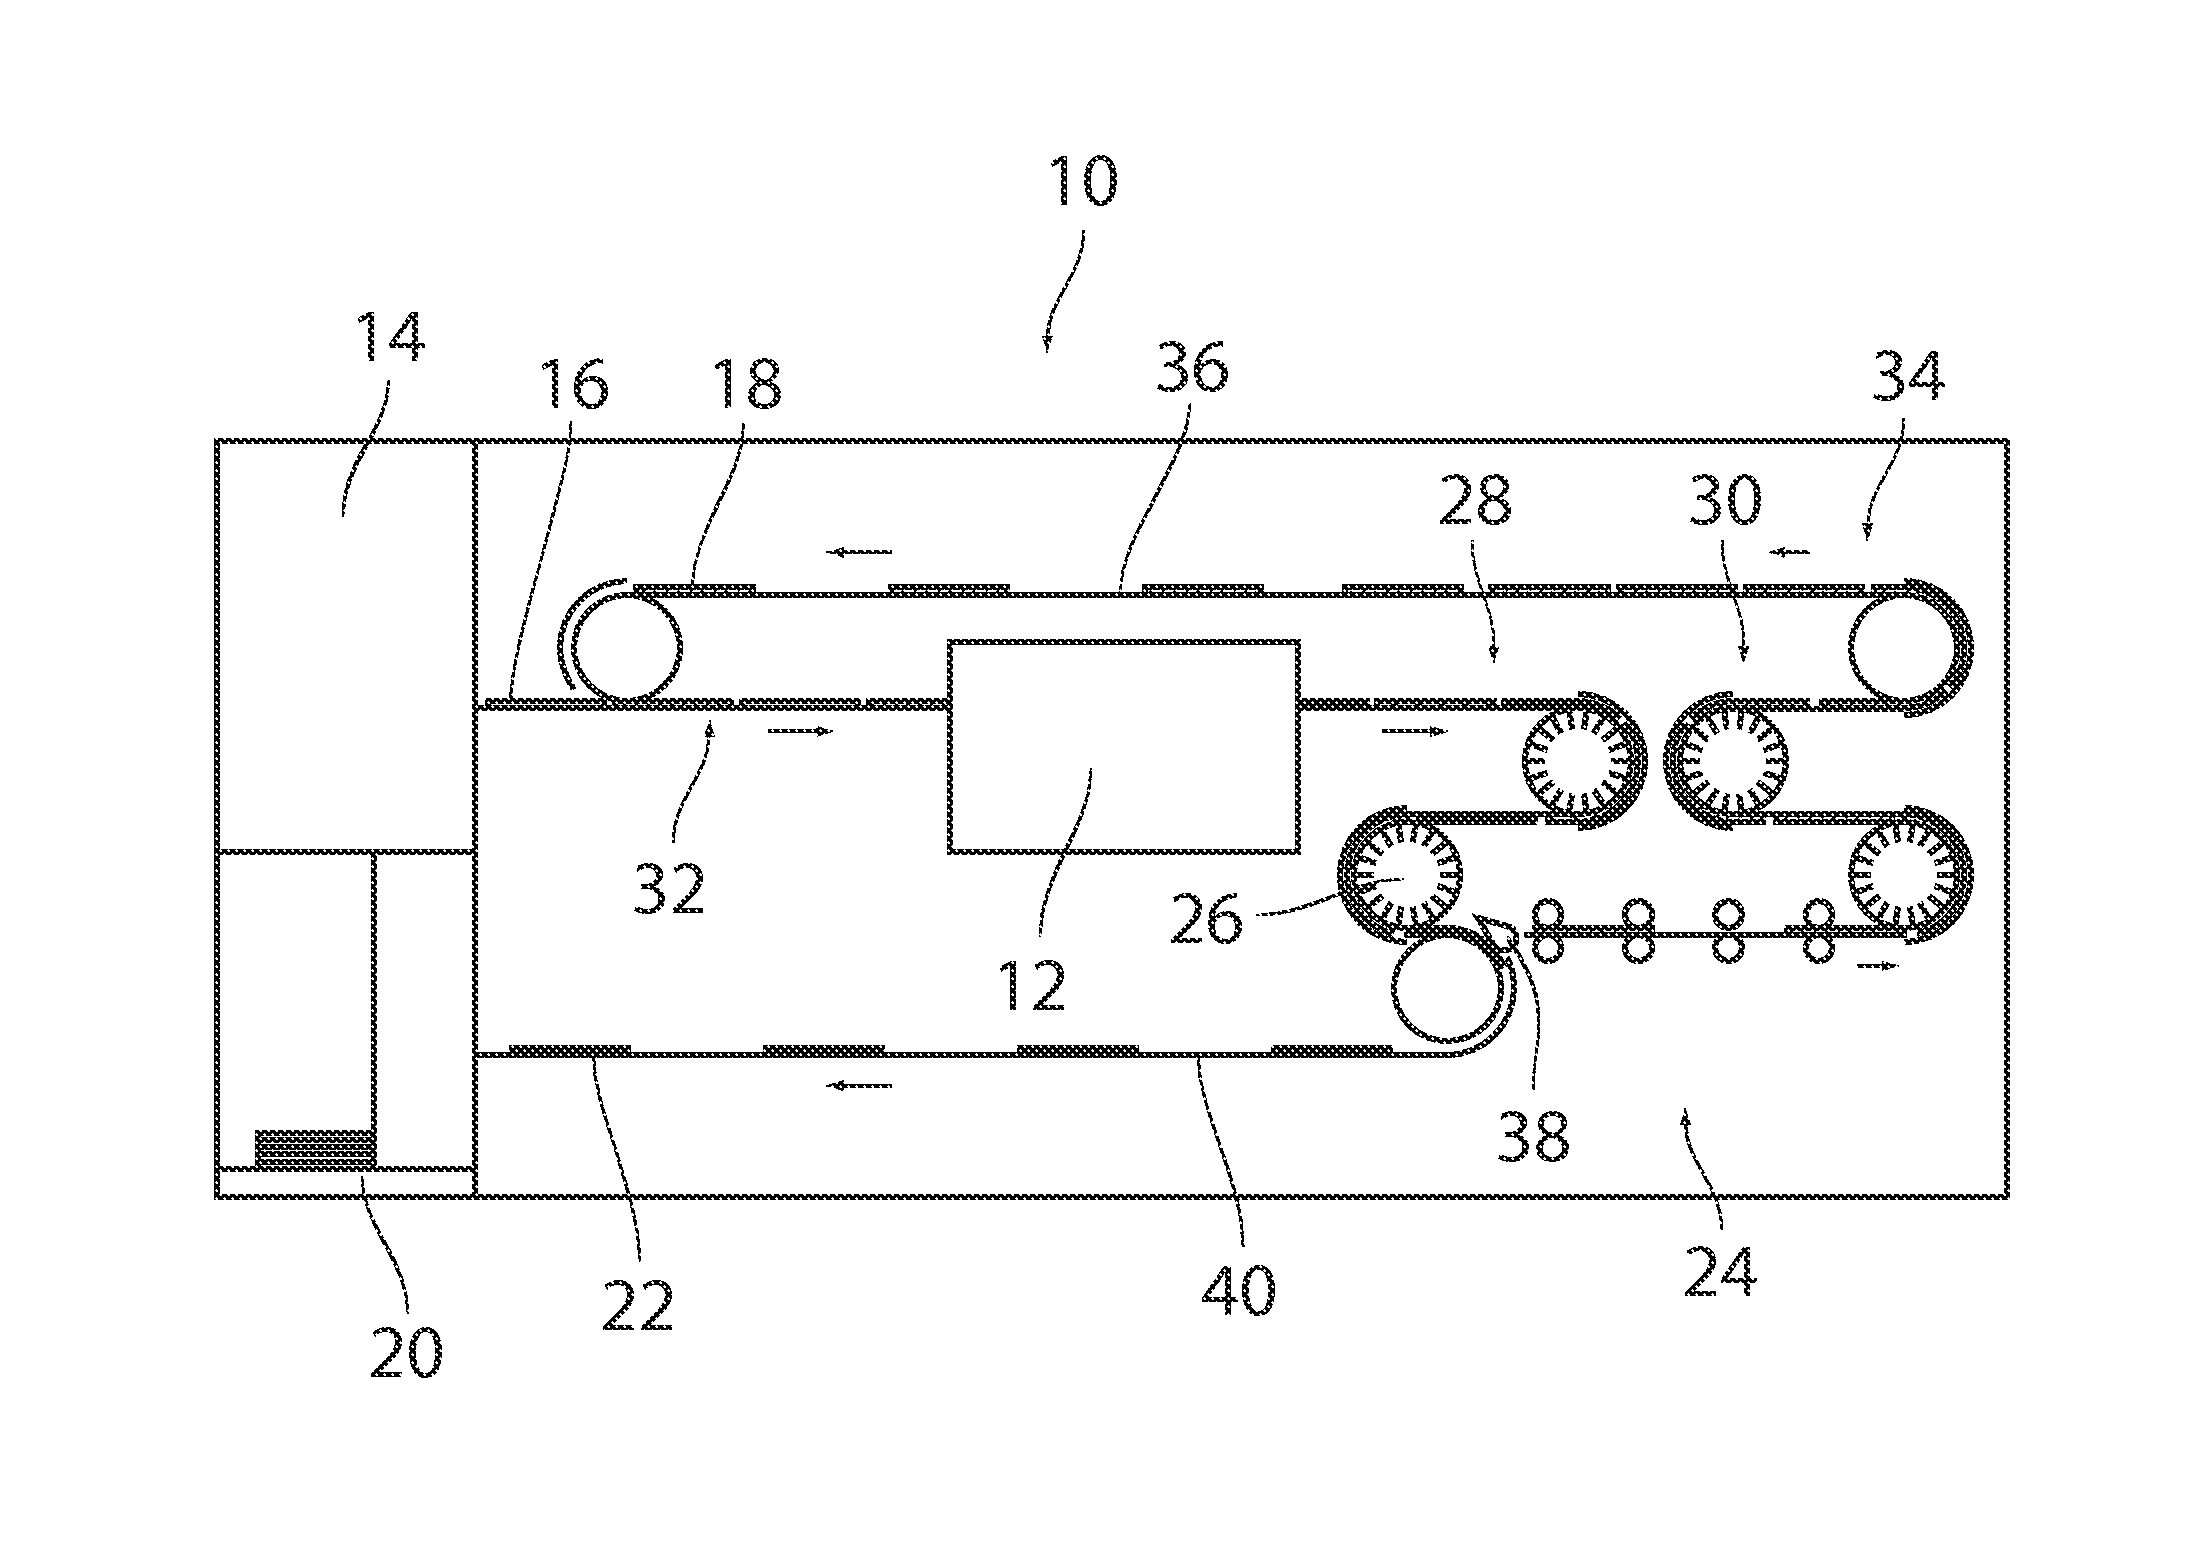 Apparatus for cooling media sheets